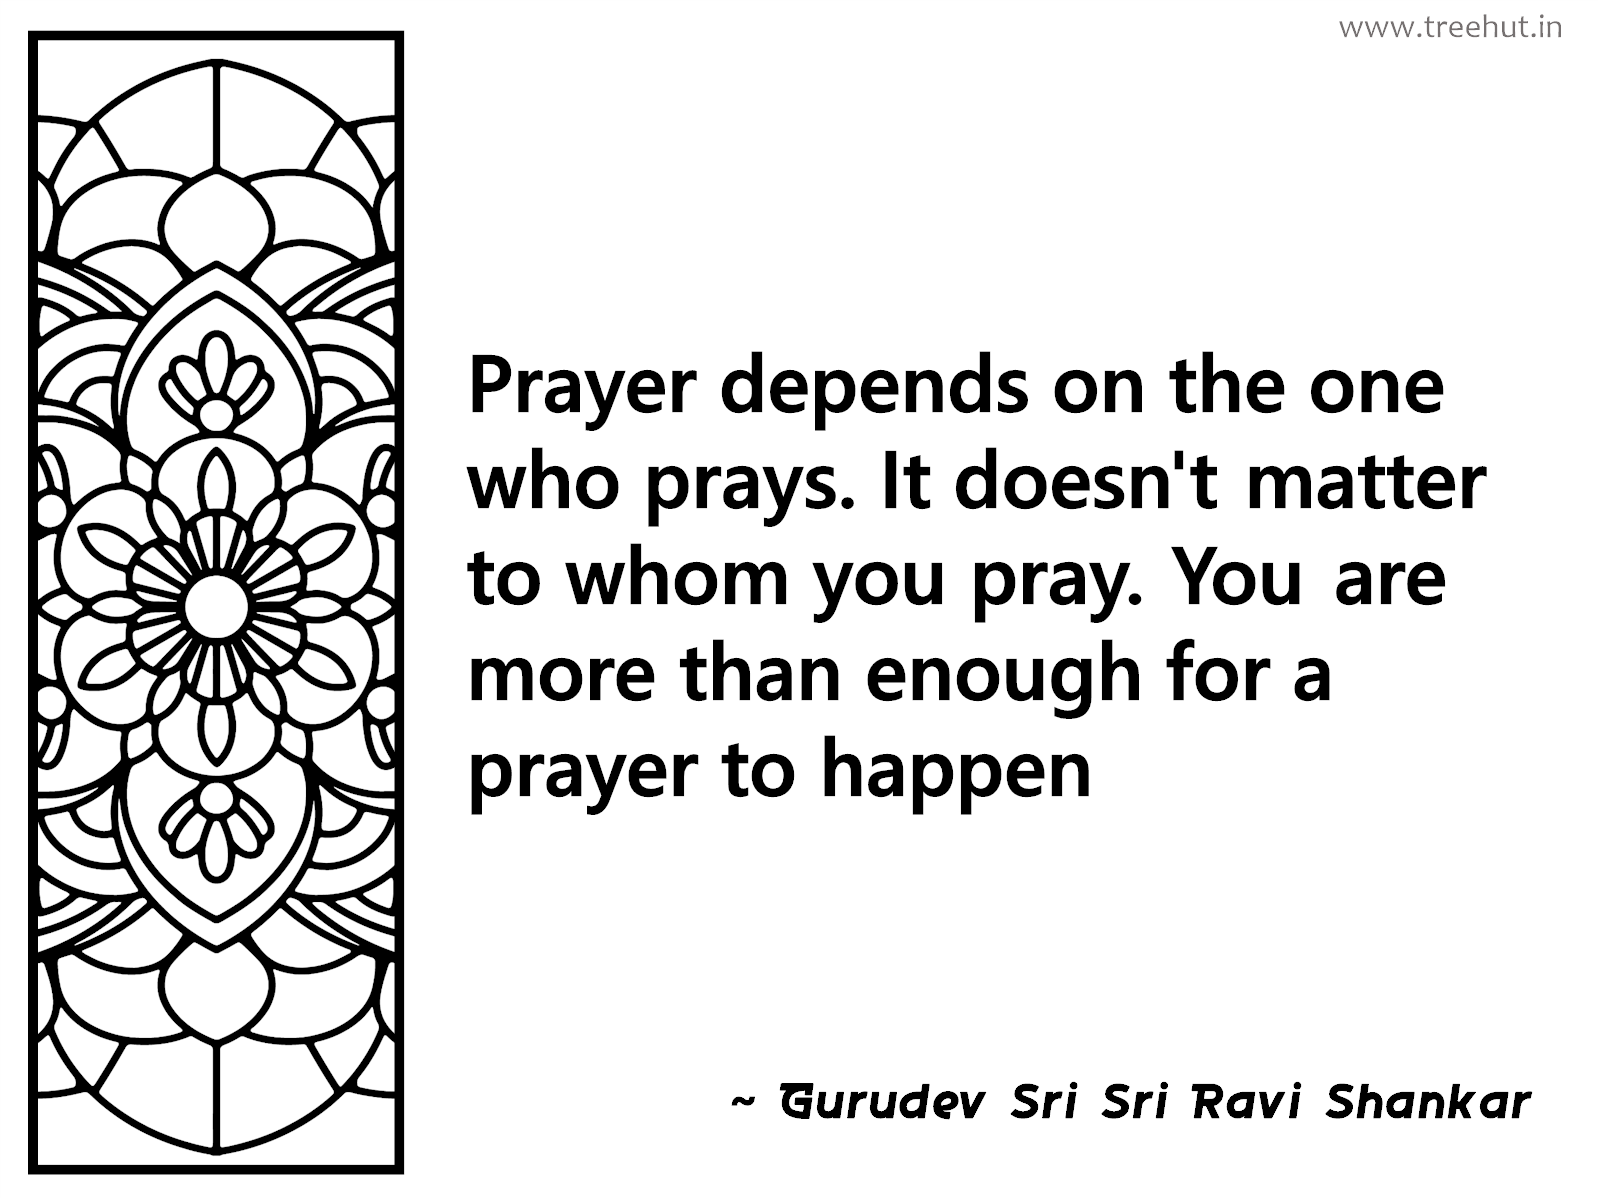 Prayer depends on the one who prays. It doesn't matter to whom you pray. You are more than enough for a prayer to happen Inspirational Quote by Gurudev Sri Sri Ravi Shankar, coloring pages